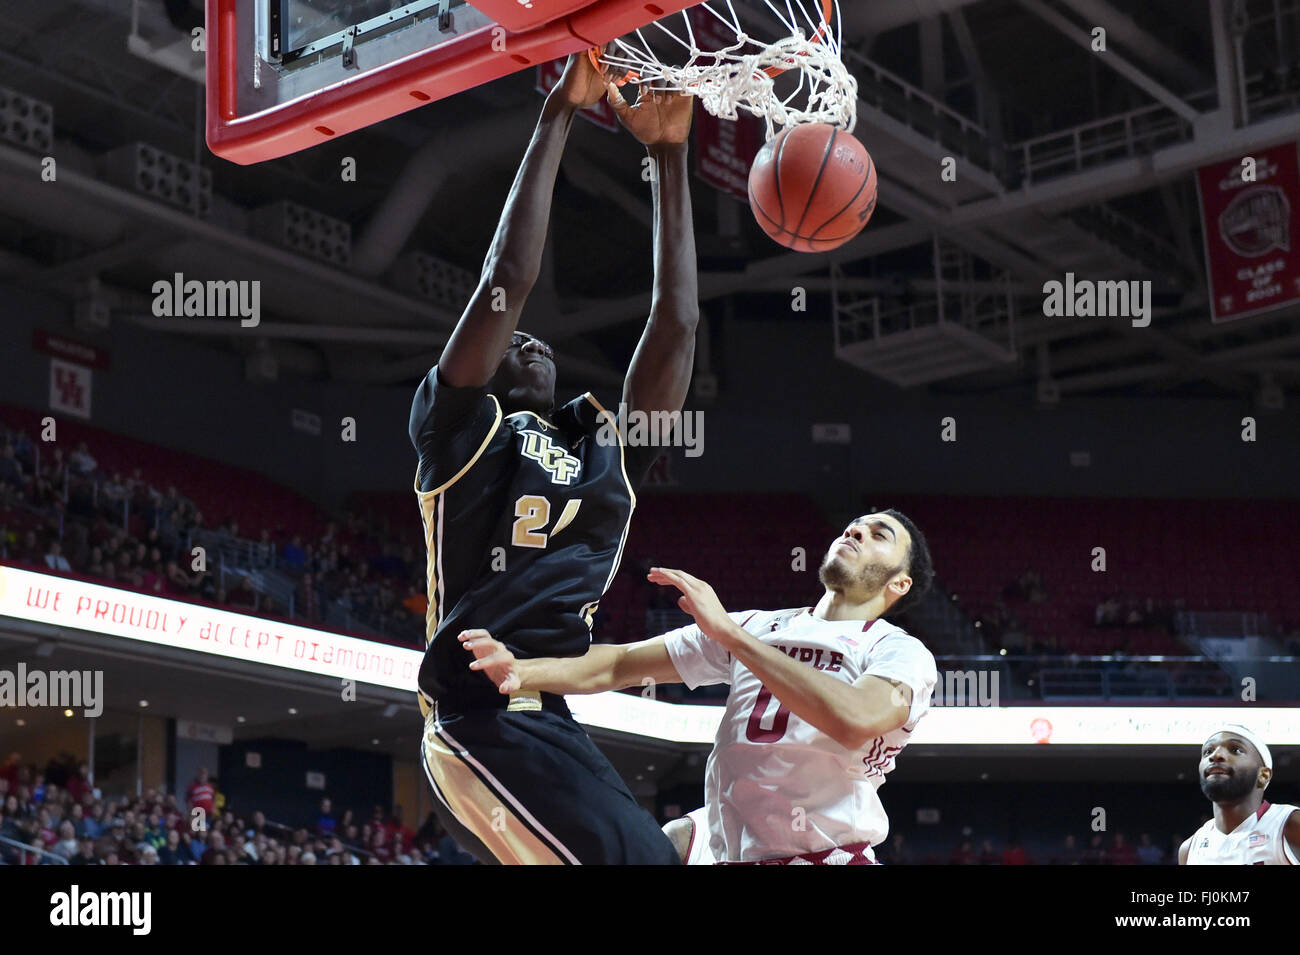 Philadelphia, Pennsylvania, USA. 27th Feb, 2016. UCF Knights center TACKO FALL (24) finishes a slam dunk in front of Temple Owls forward OBI ENECHIONYIA (0) during the NCAA basketball game played at the Liacouras Center in Philadelphia. Temple beat UCF 63-61. Credit:  Ken Inness/ZUMA Wire/Alamy Live News Stock Photo